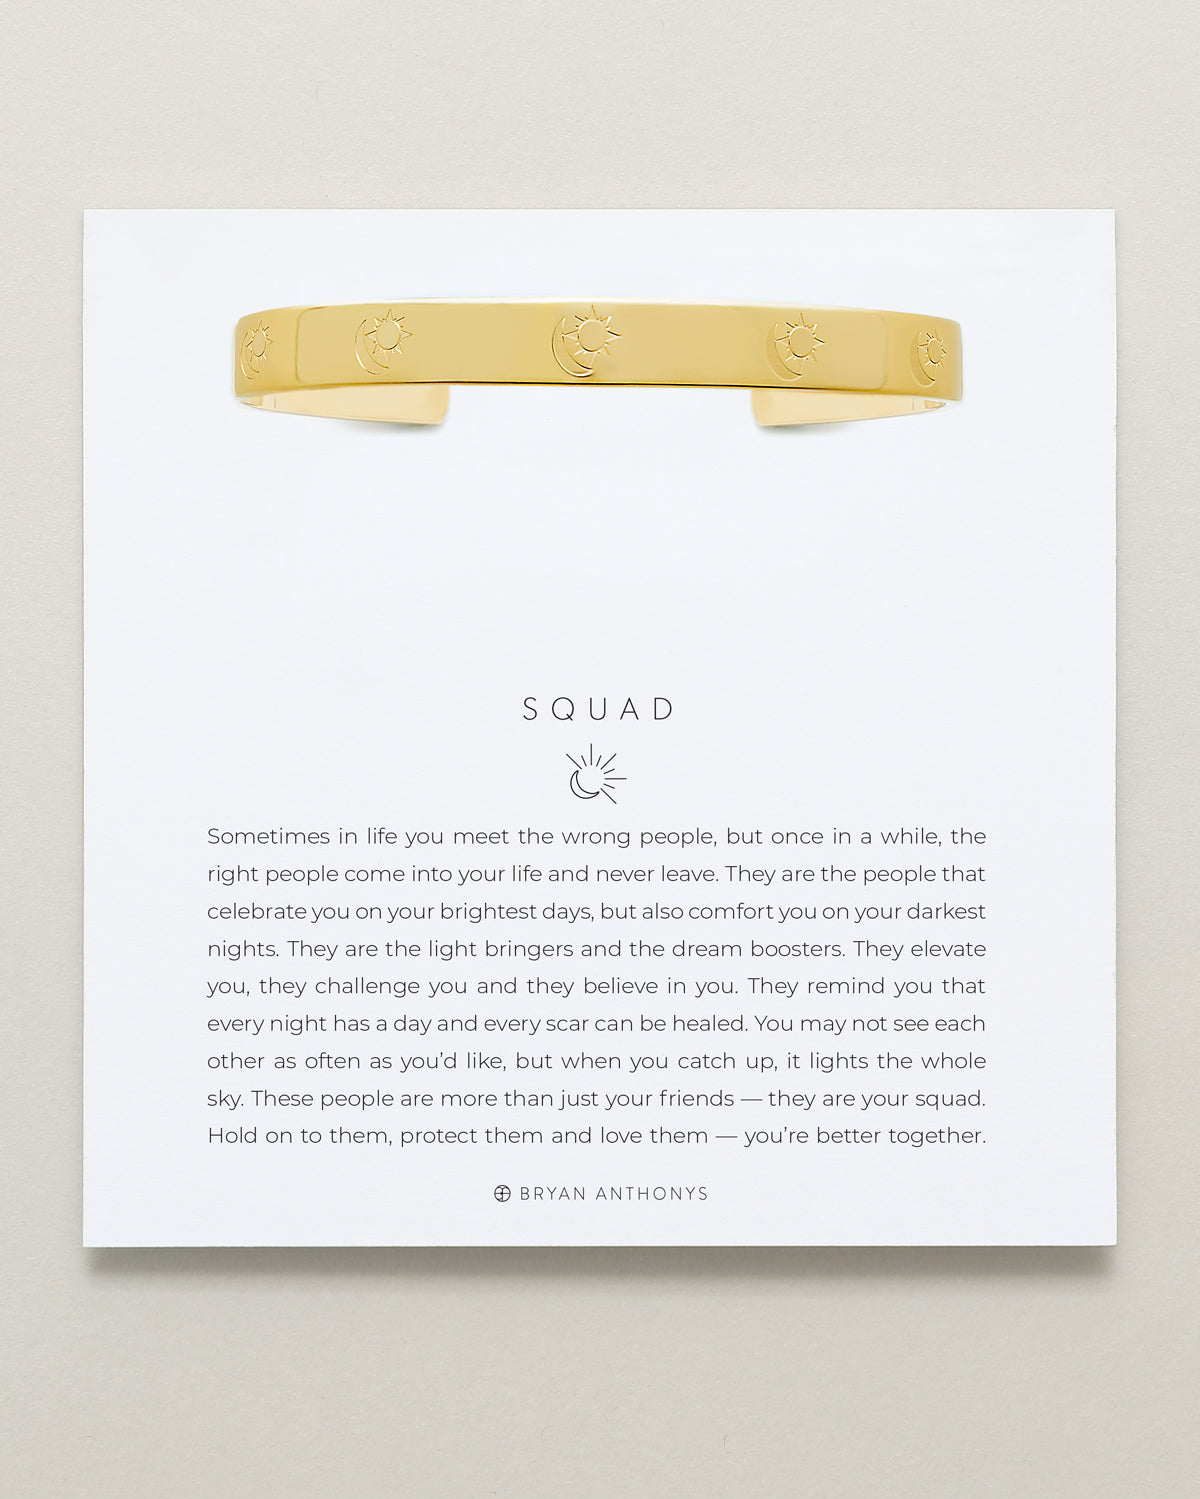 Bryan Anthonys Squad Gold Engraved Cuff On Card